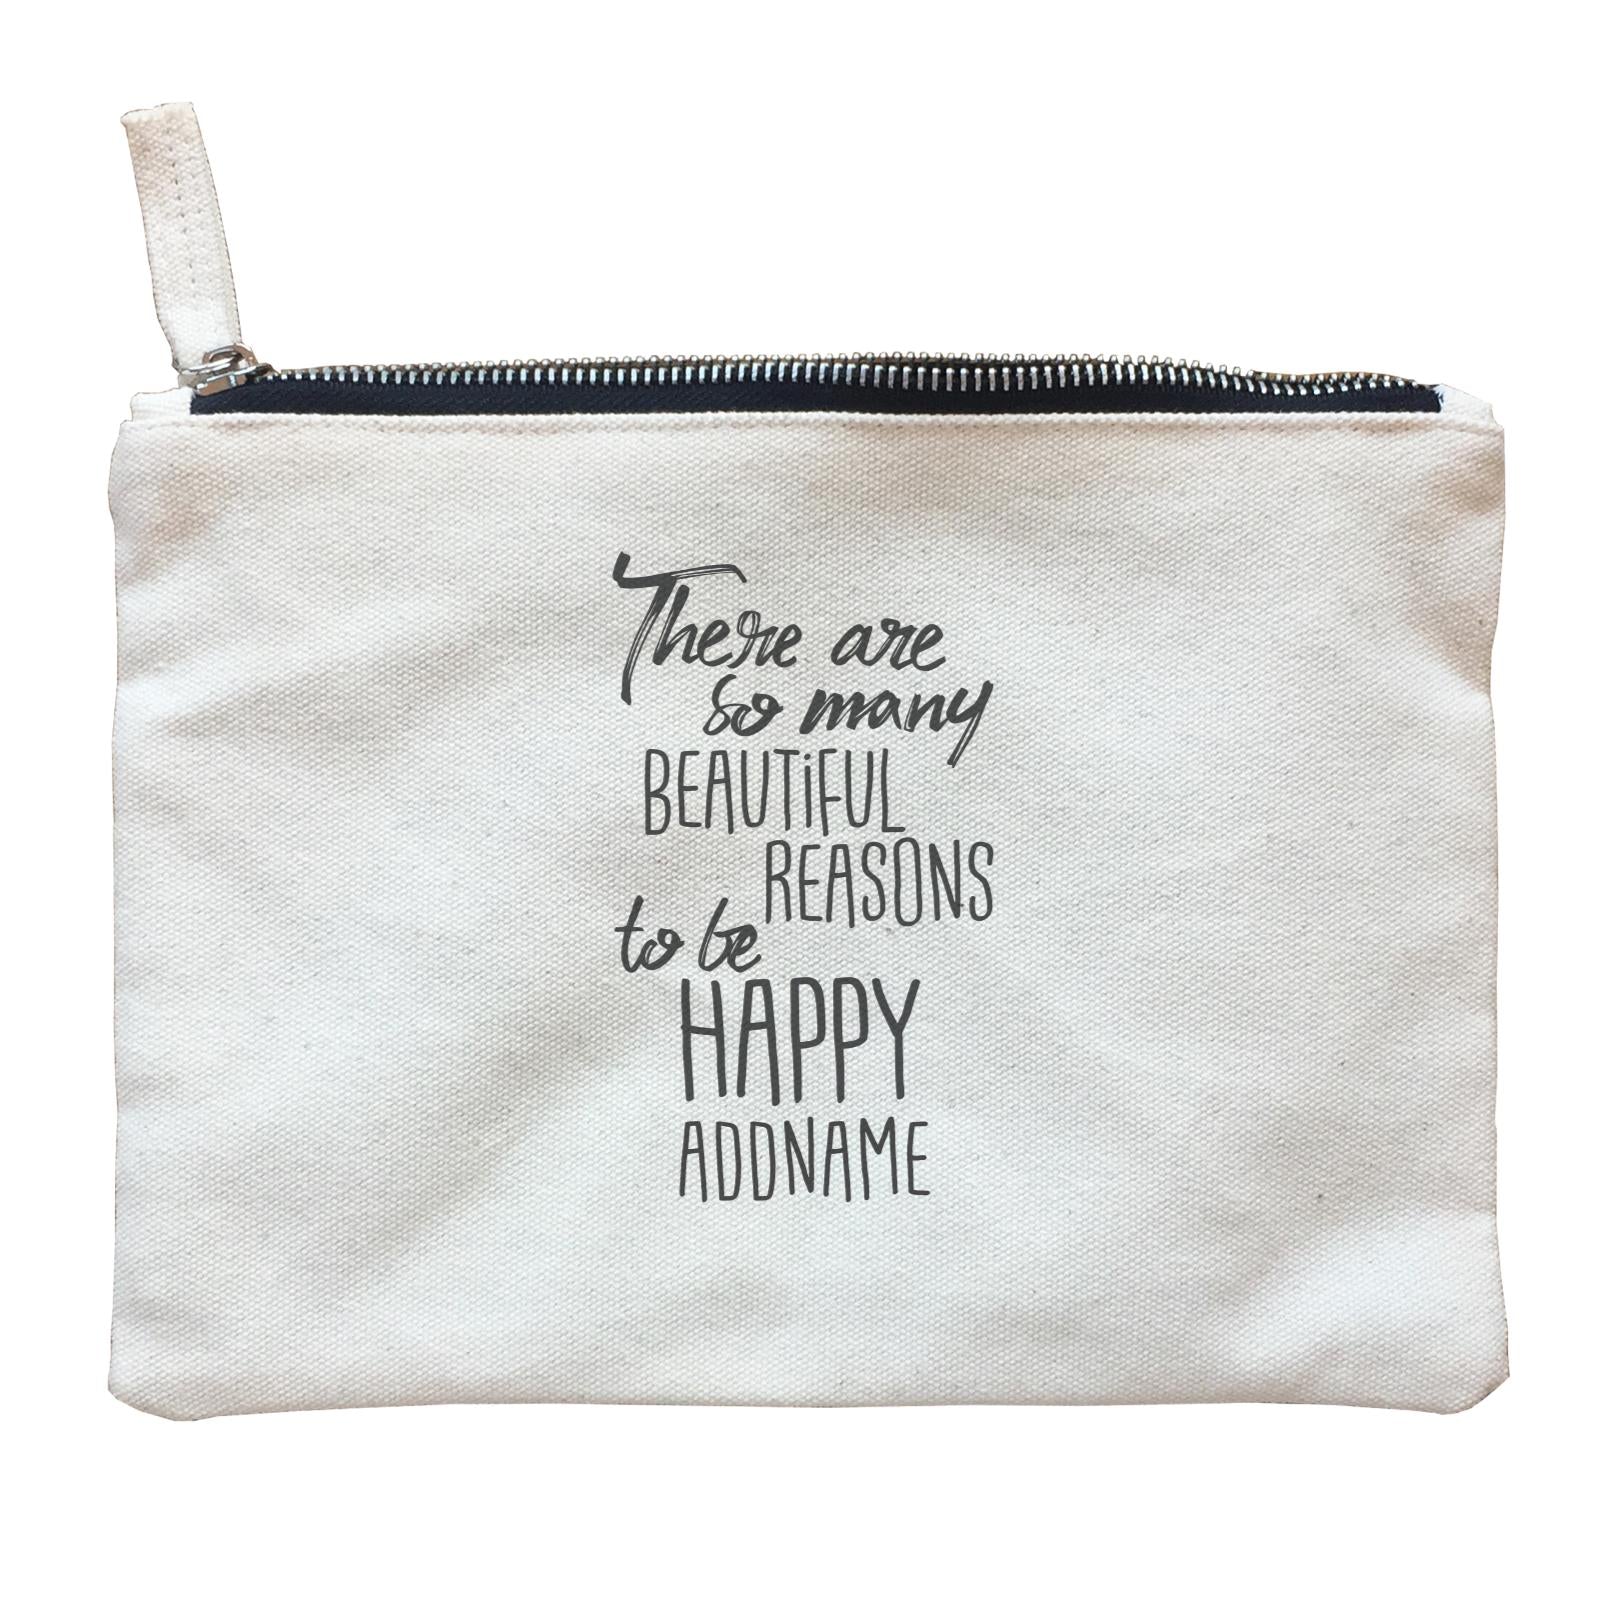 Inspiration Quotes There Are So Many Beautiful Reasons To Be Happy Addname Zipper Pouch